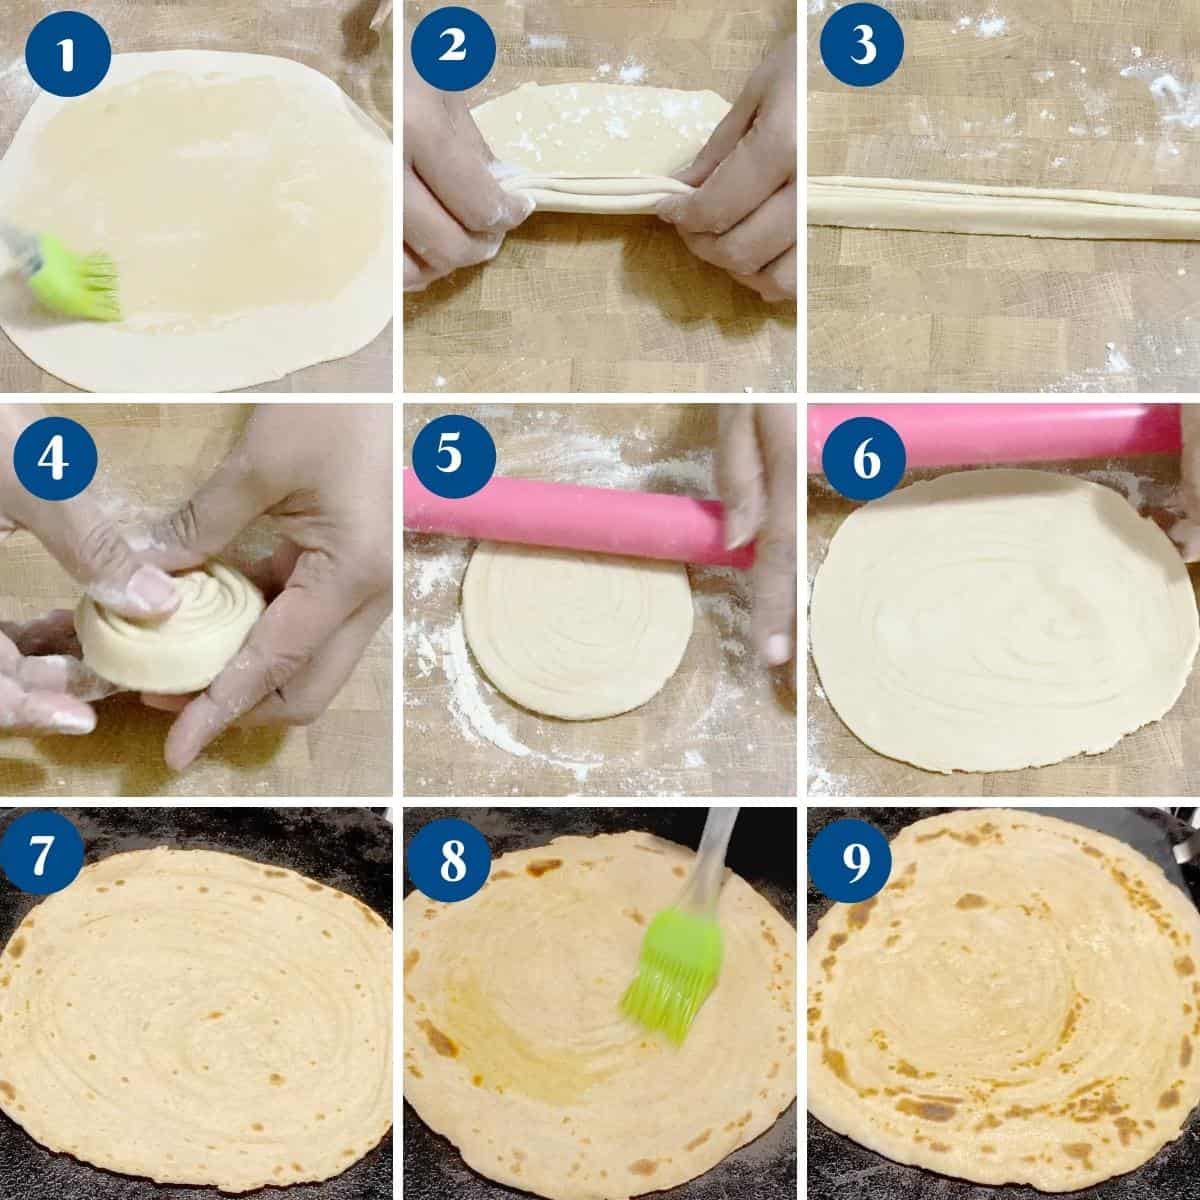 Progress pictures making the lachha paratha.